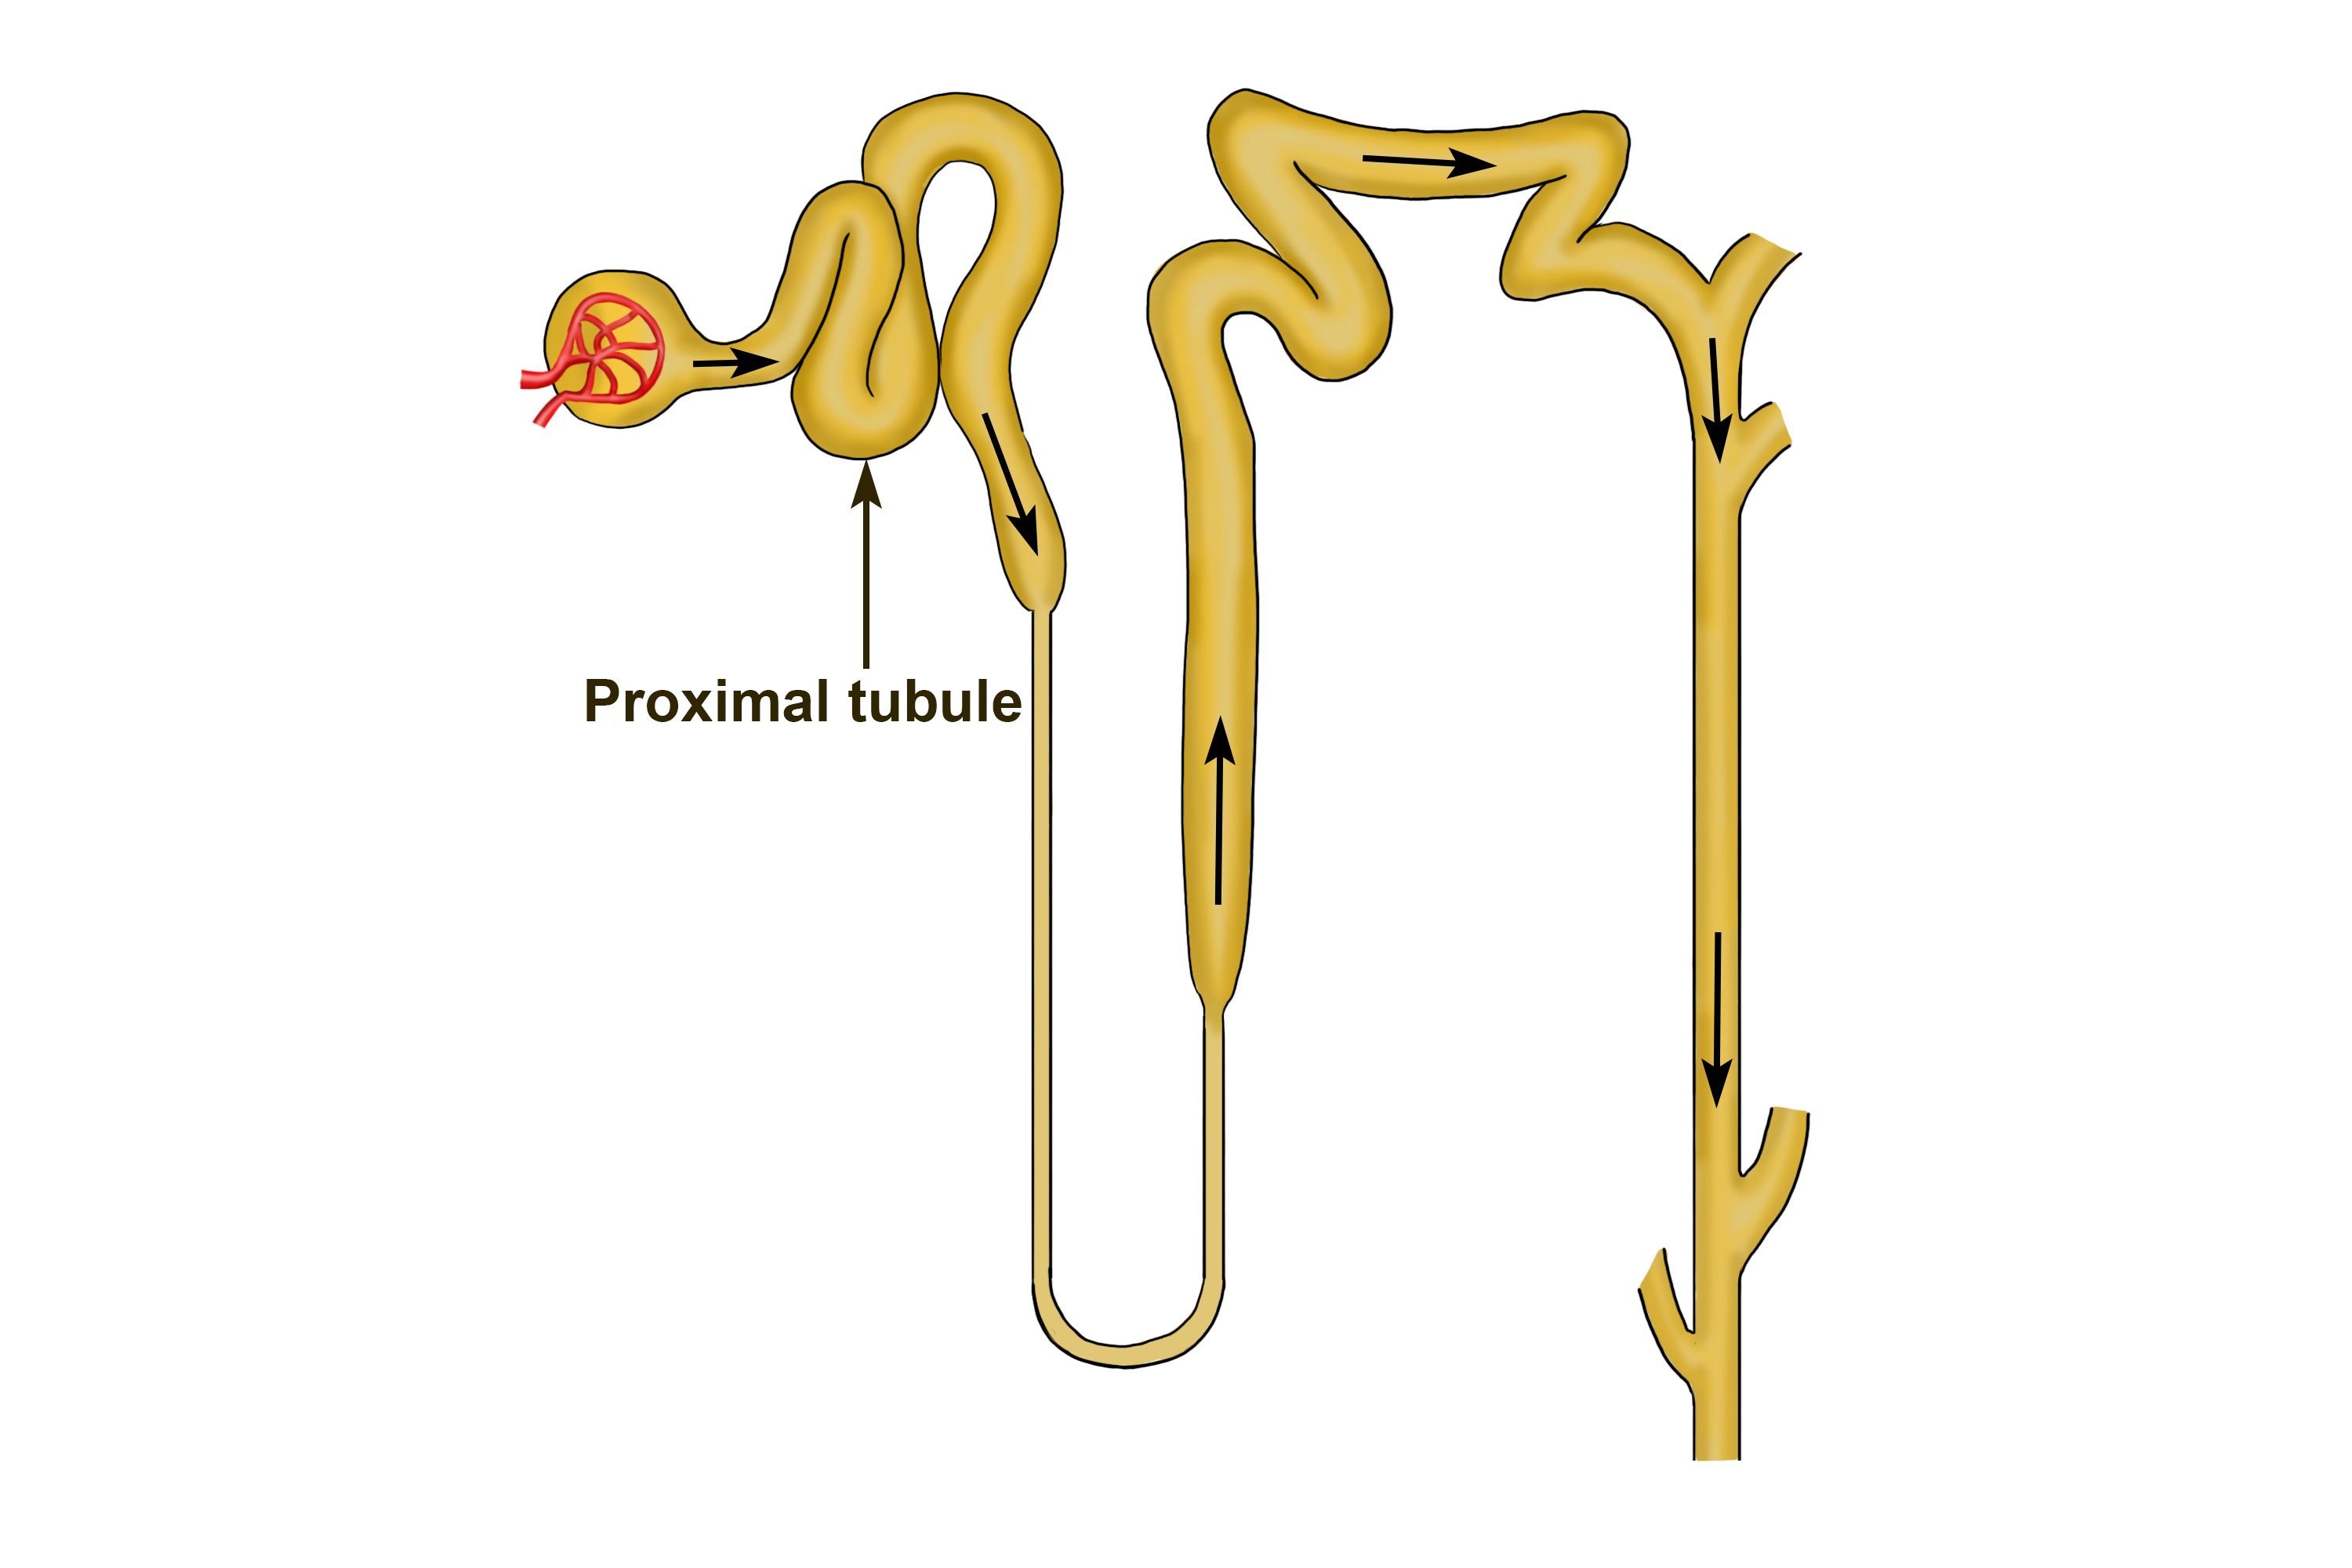 The proximal tubule is the first bend in the filtration system and where the separation of substances begin